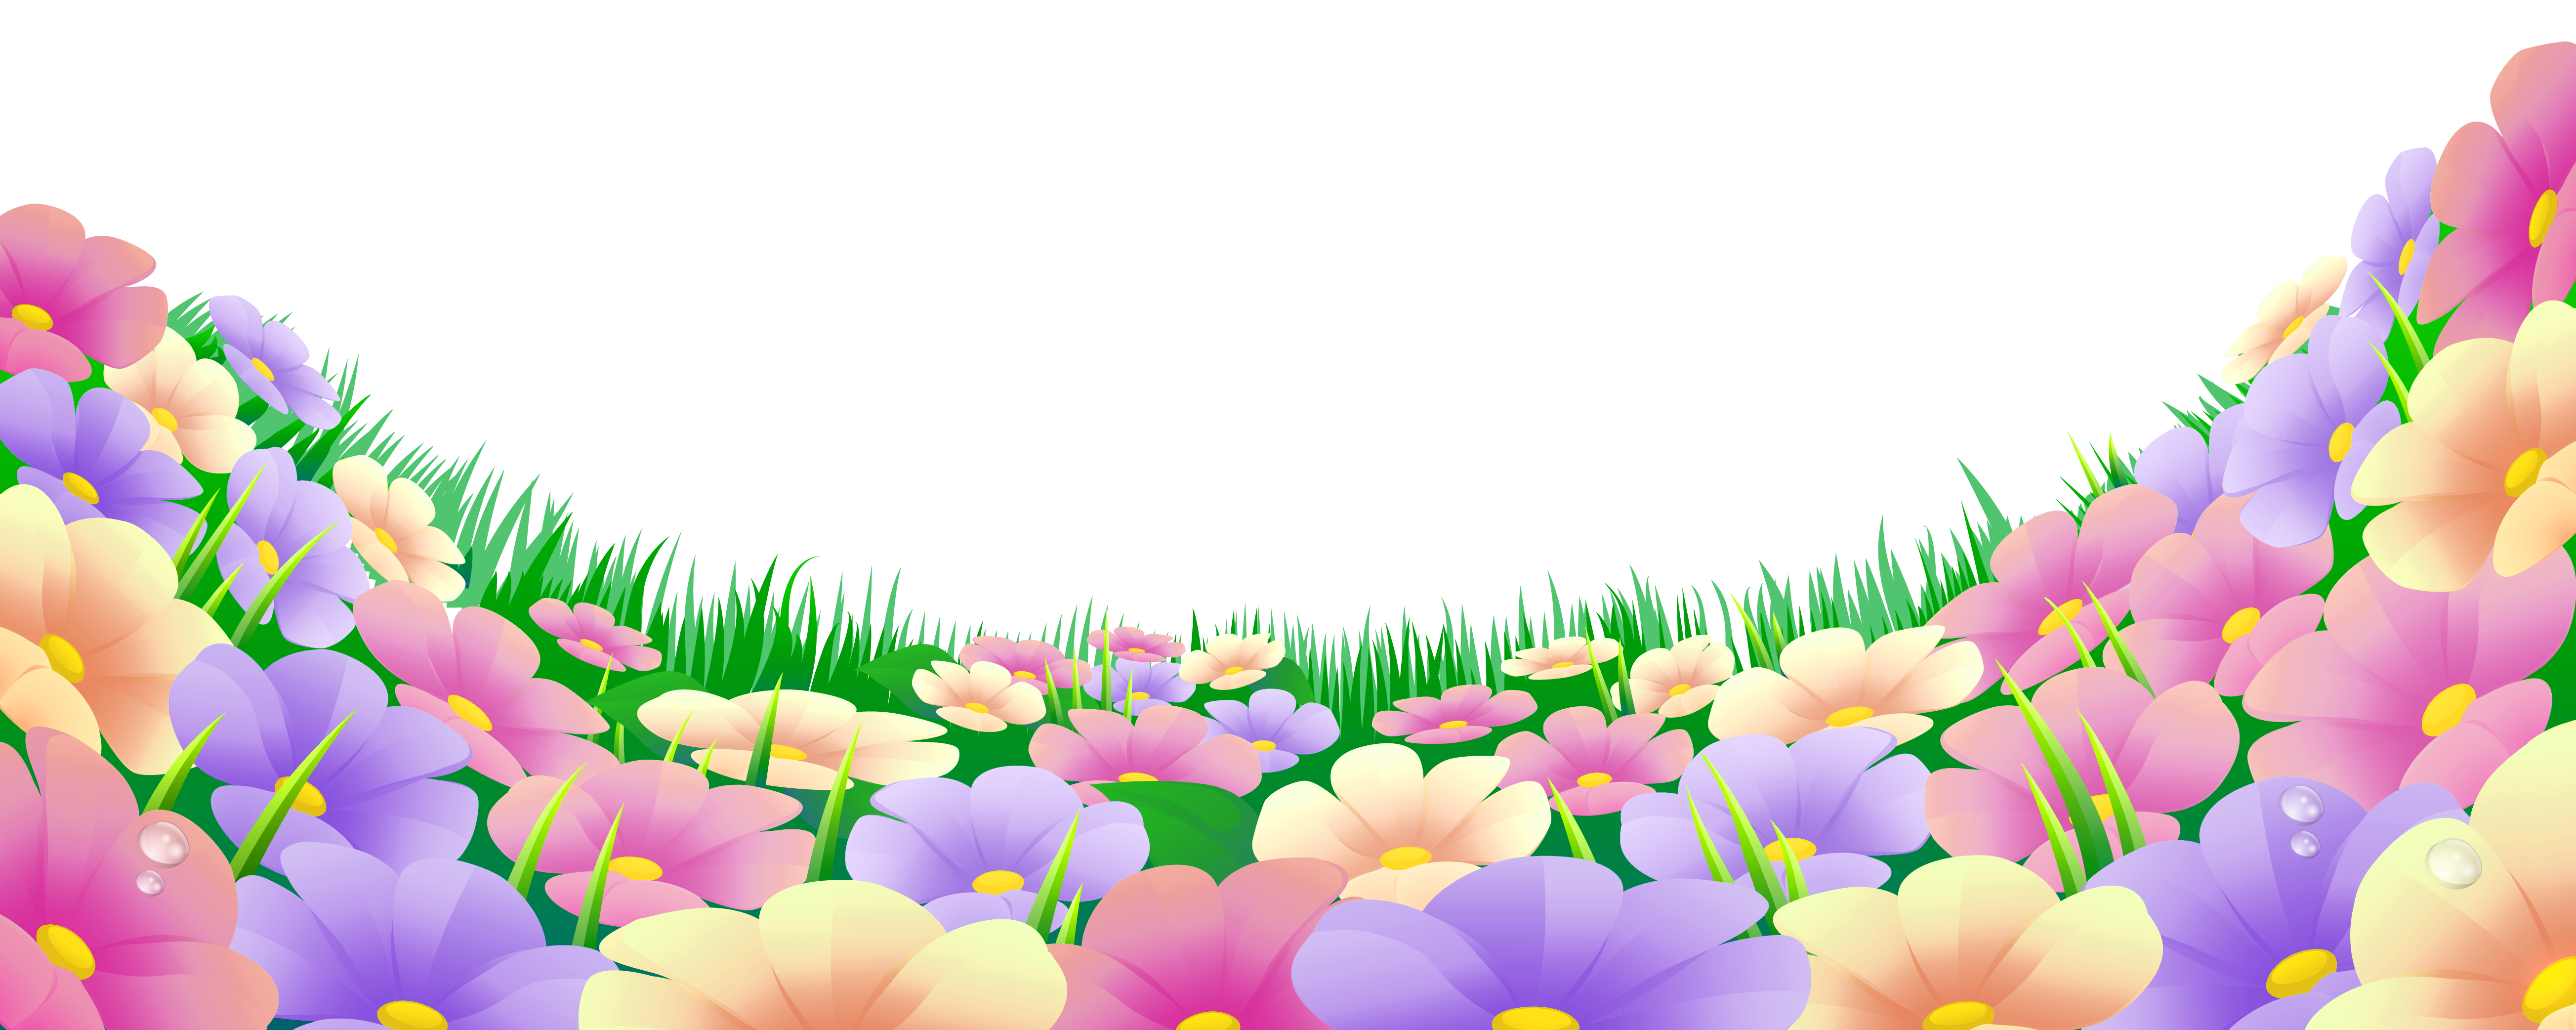 Clipart flower pretty flower. Grass with beautiful flowers